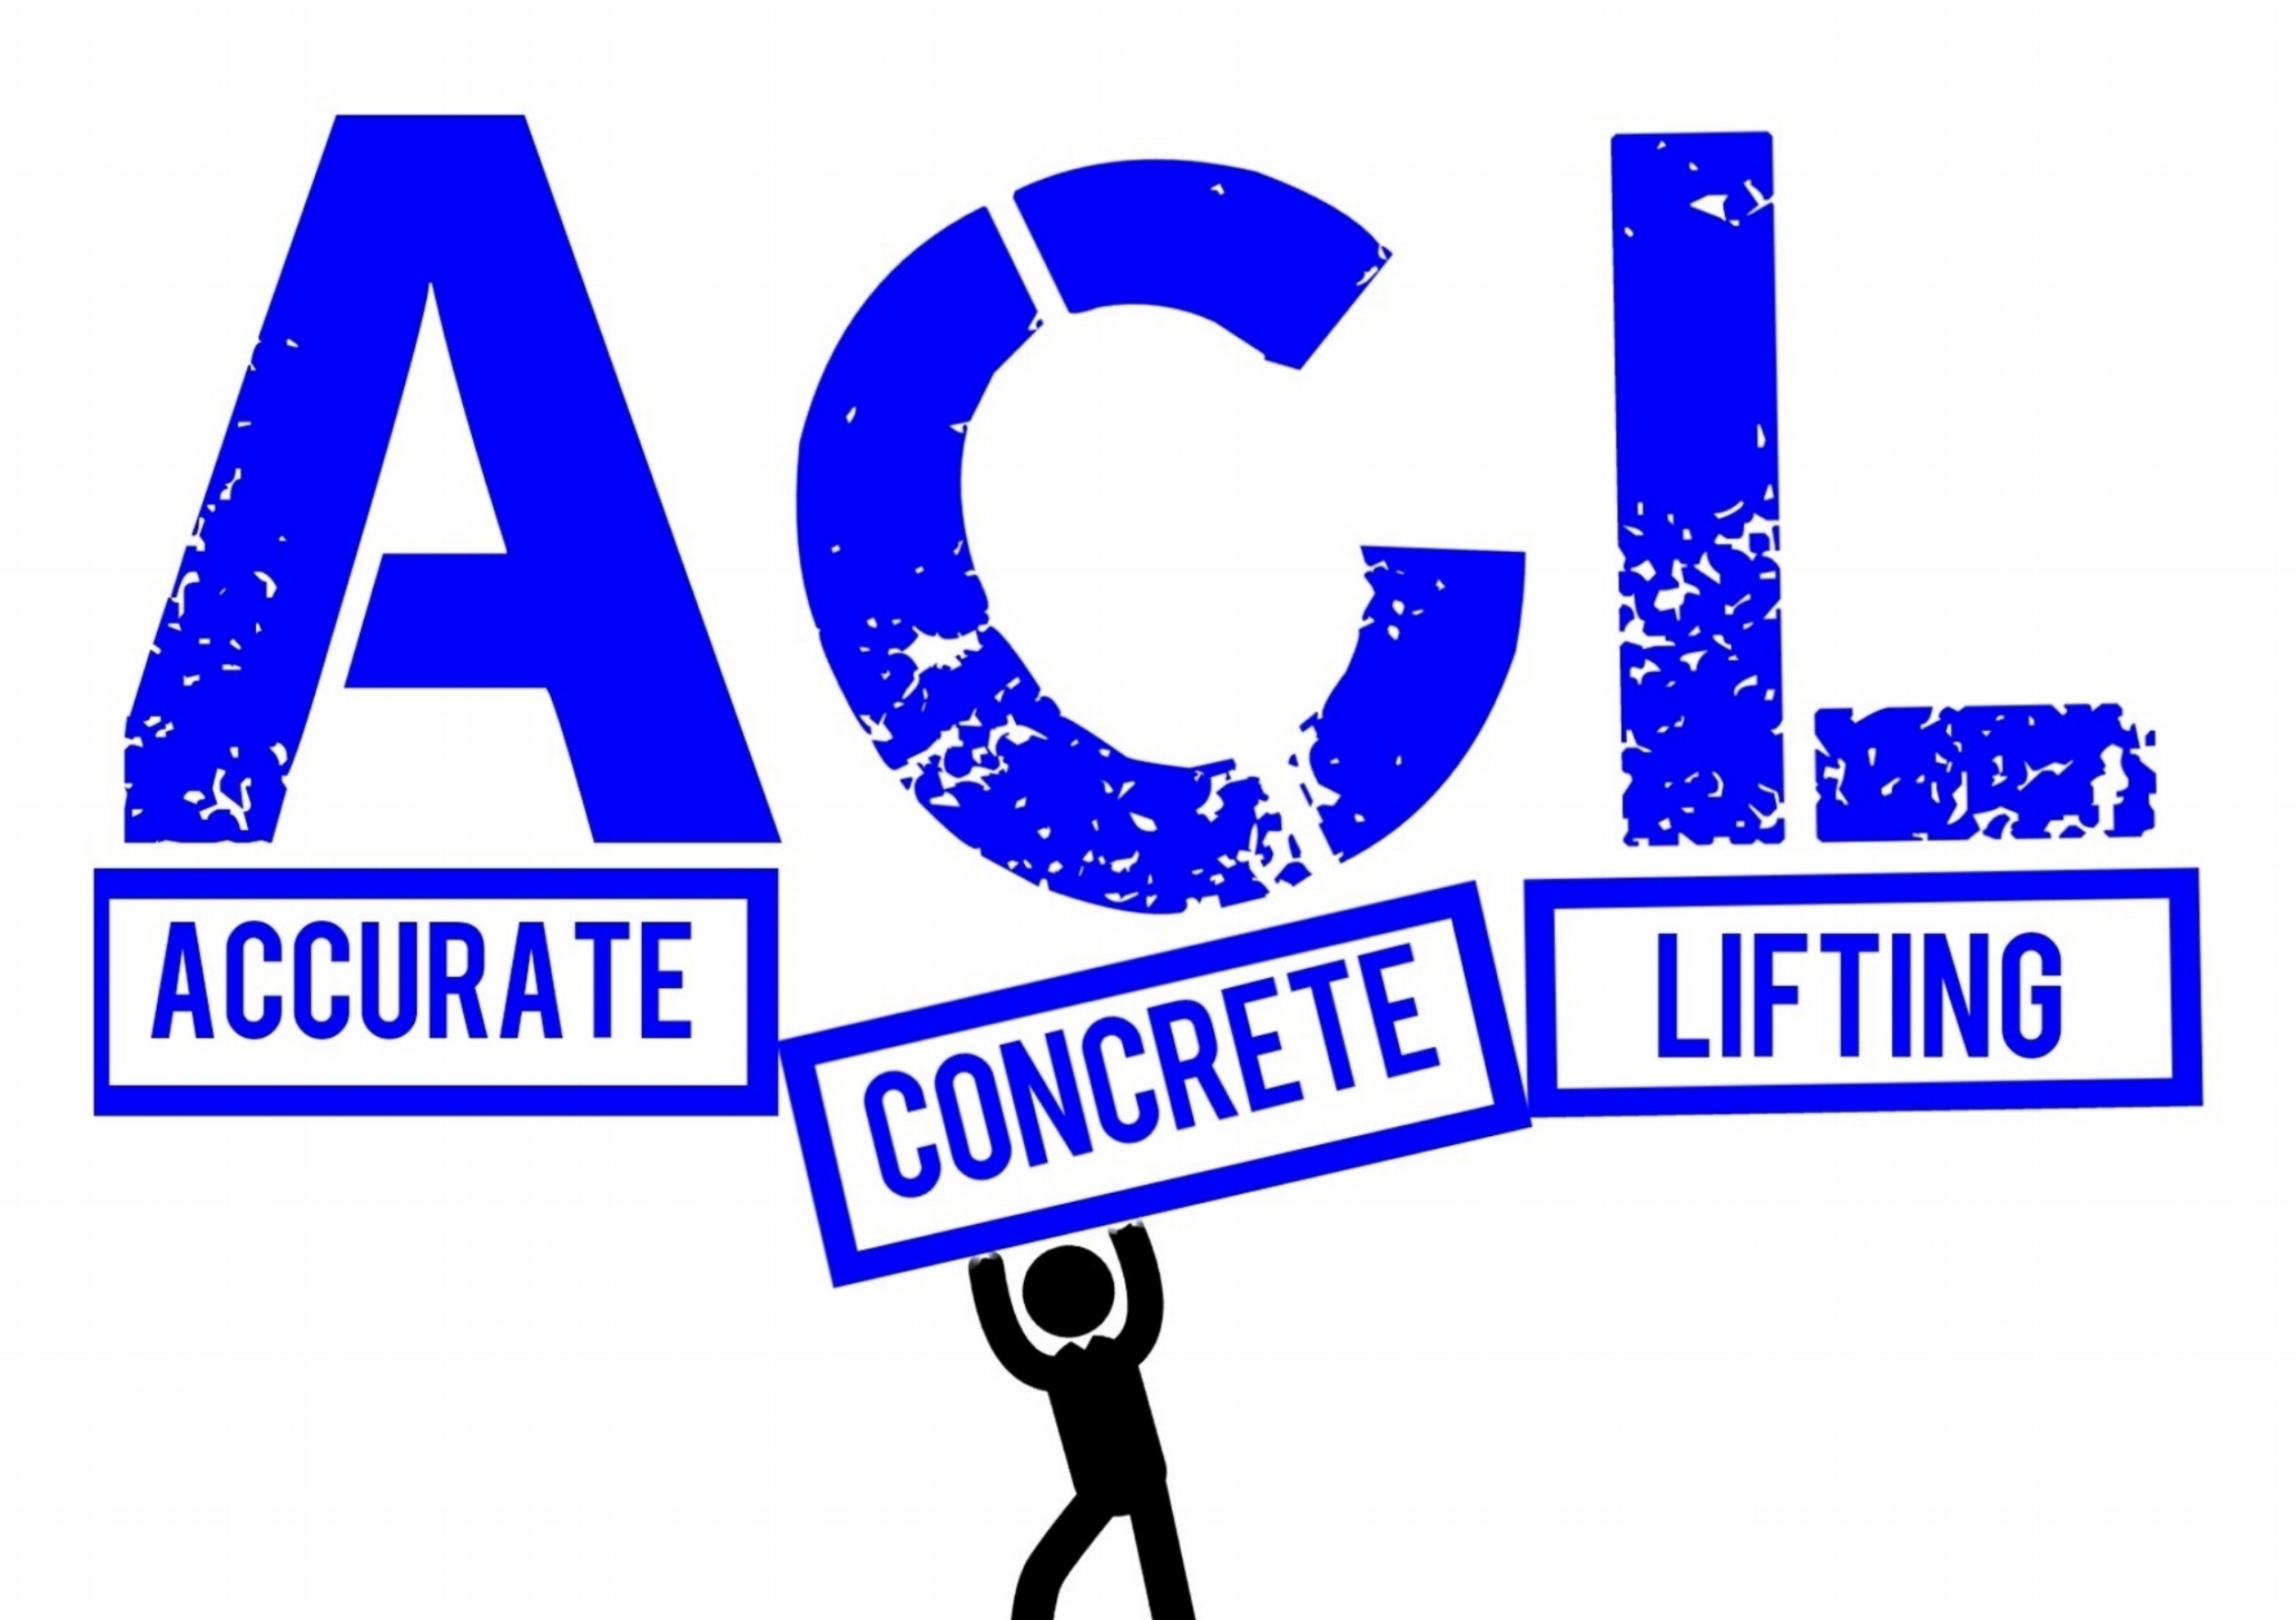 ACCURATE CONCRETE LIFTING